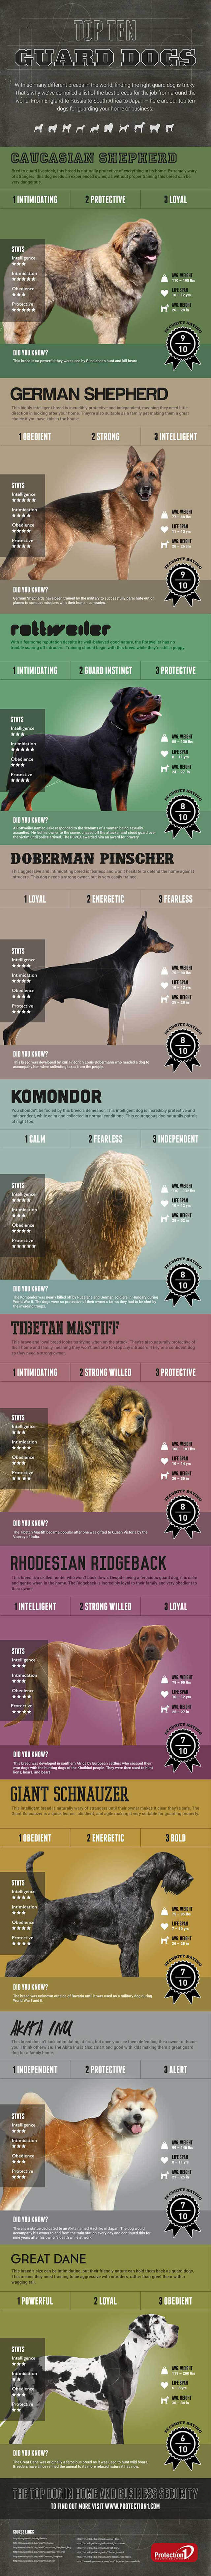 HISTORY OF GUARD DOGS - INFOGRAPHICS, PRESS TO DOWNLOAD